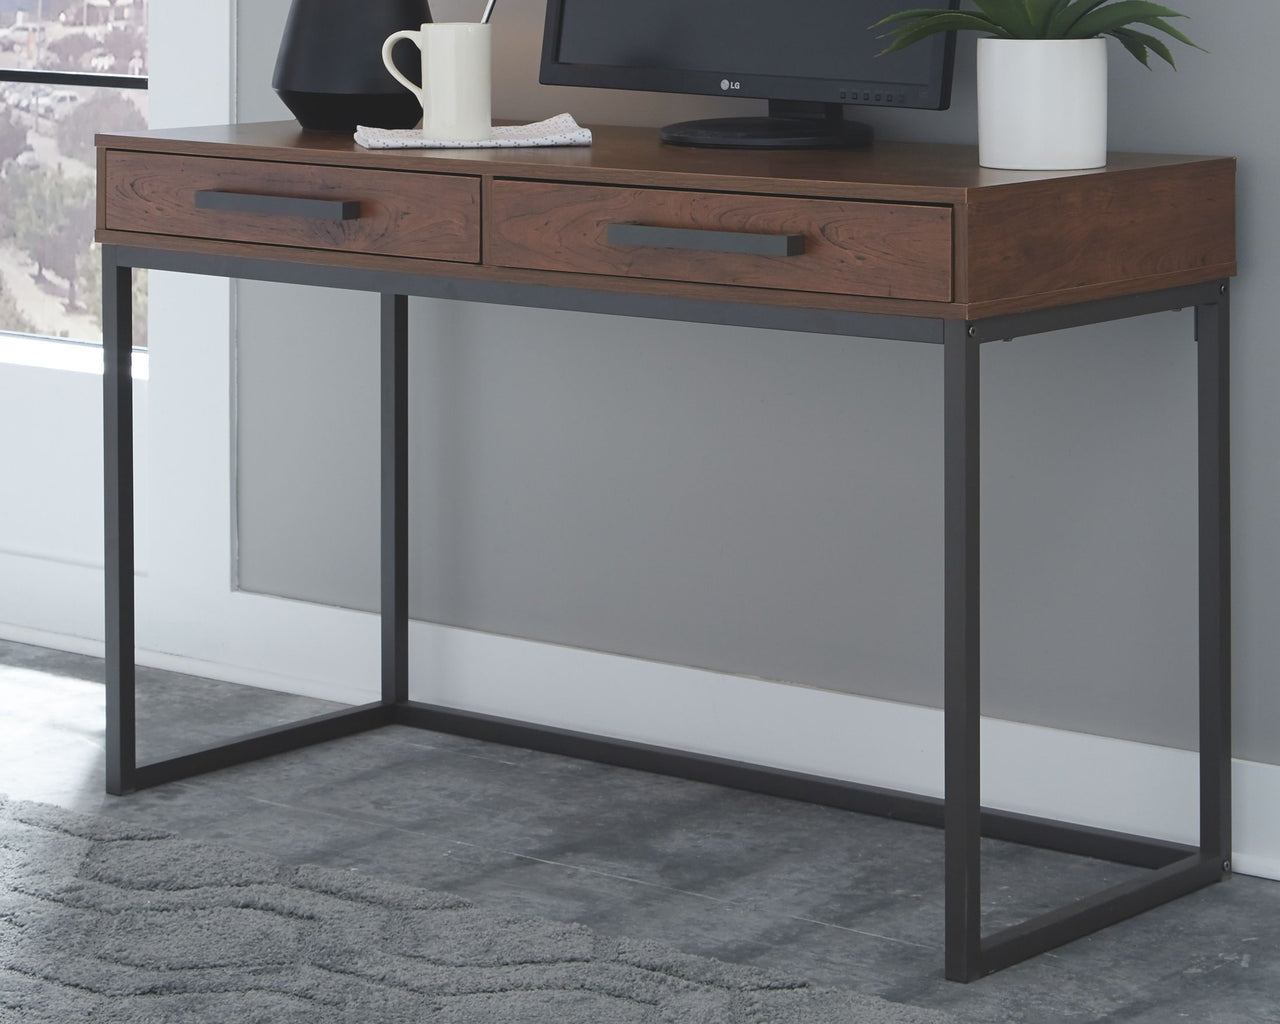 Horatio - Warm Brown / Gunmetal - Home Office Small Desk - Tony's Home Furnishings